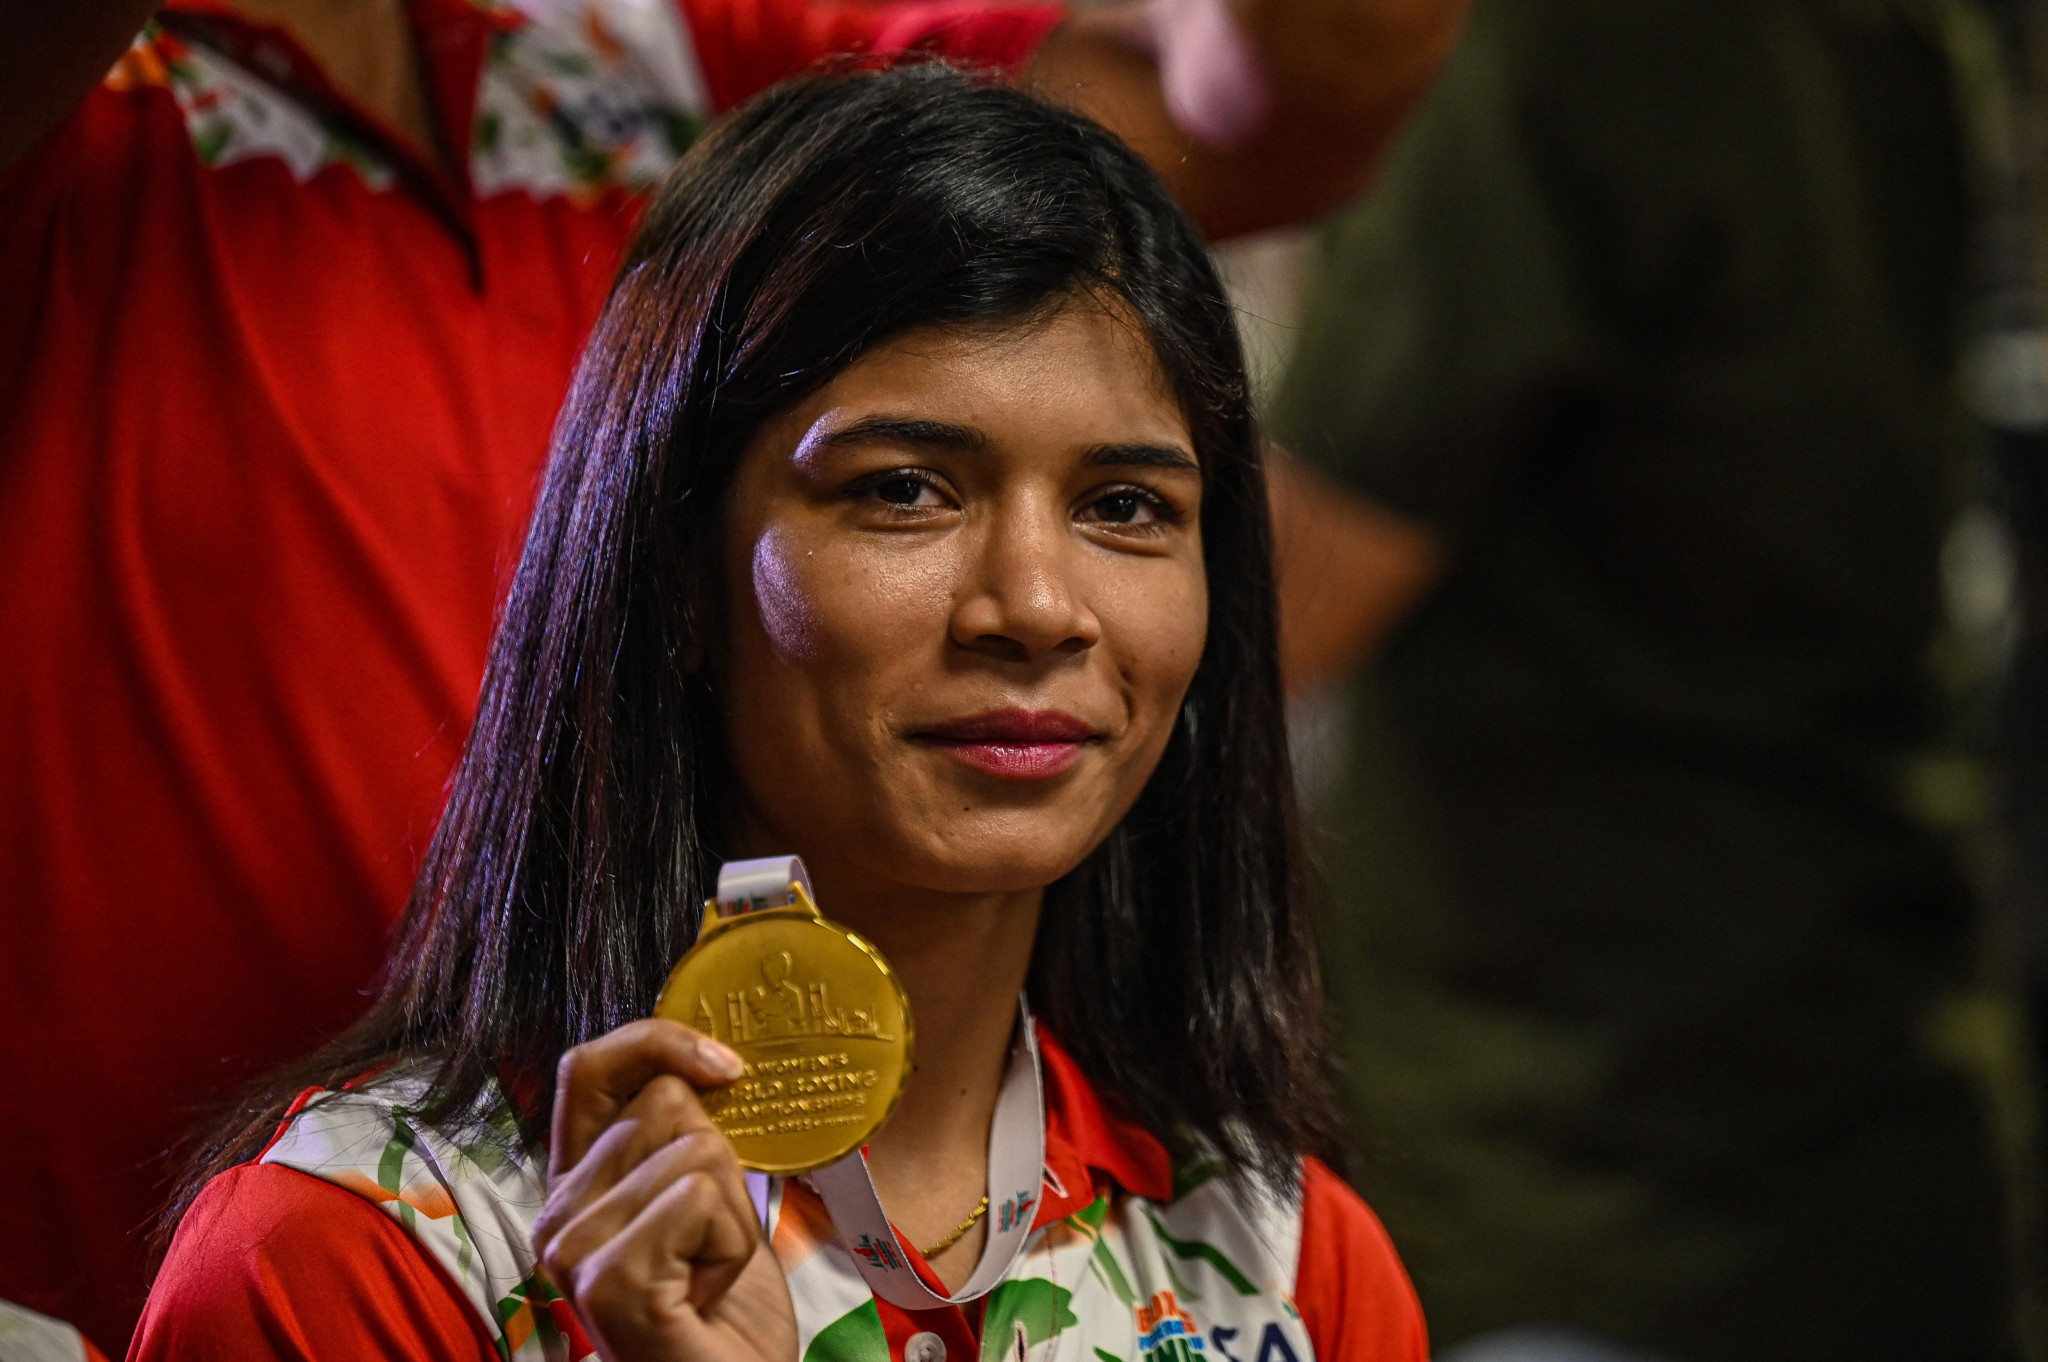 World champion Nikhat Zareen is among the group of Indian boxers due to take part in the preparatory camp and the Commonwealth Games ©Getty Images